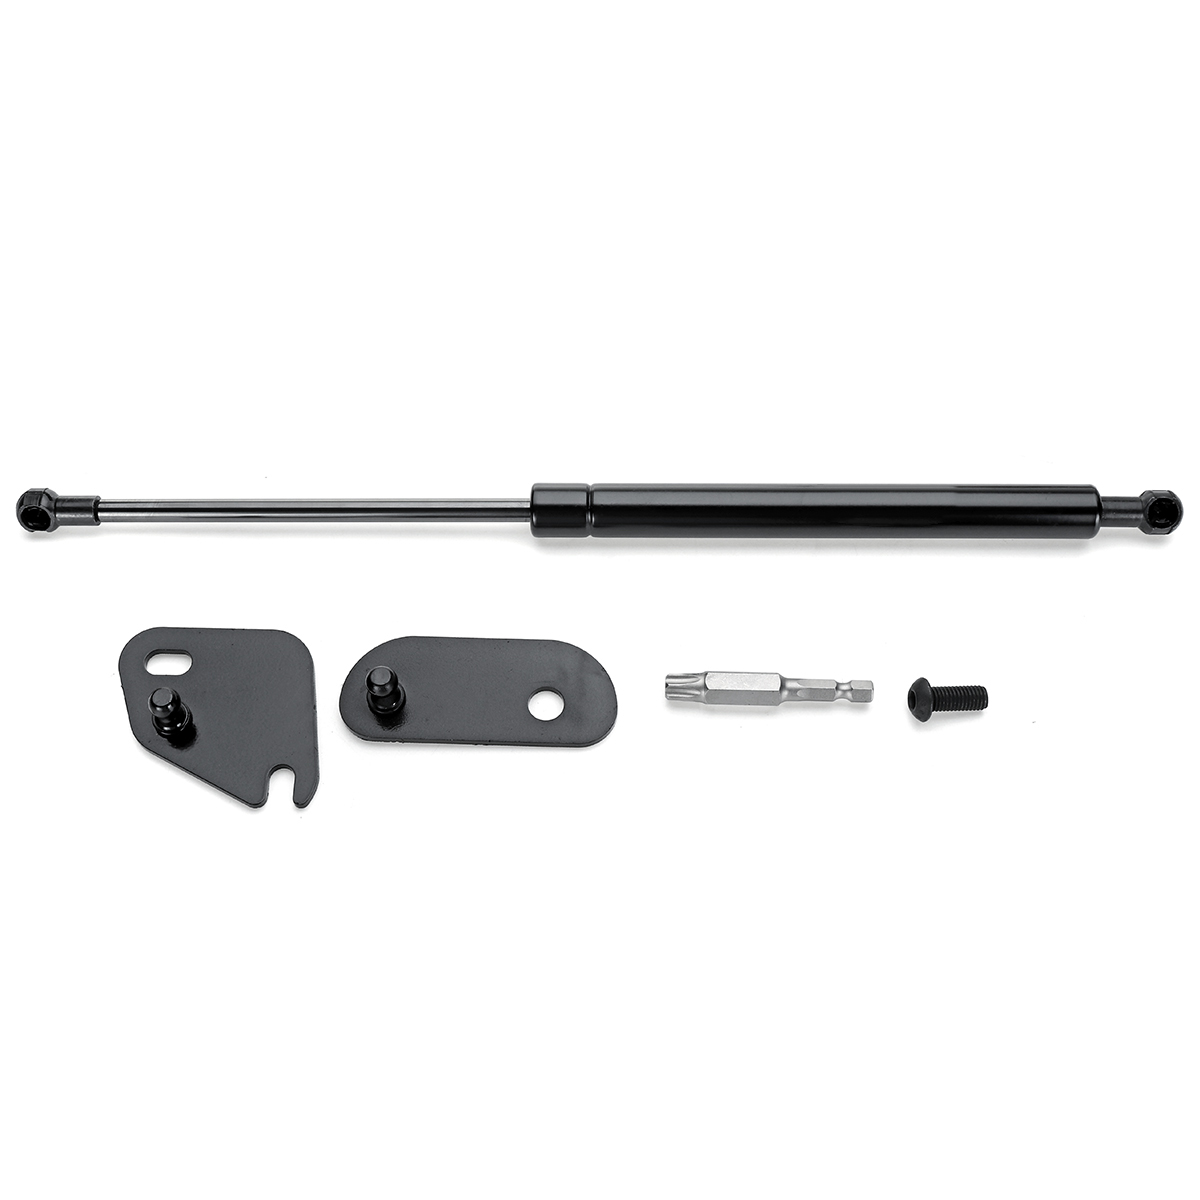 Tailgate Assist Shock Tail Strut Bar for Ford F-150 Truck 2015 2016 2017 2018 - Auto GoShop